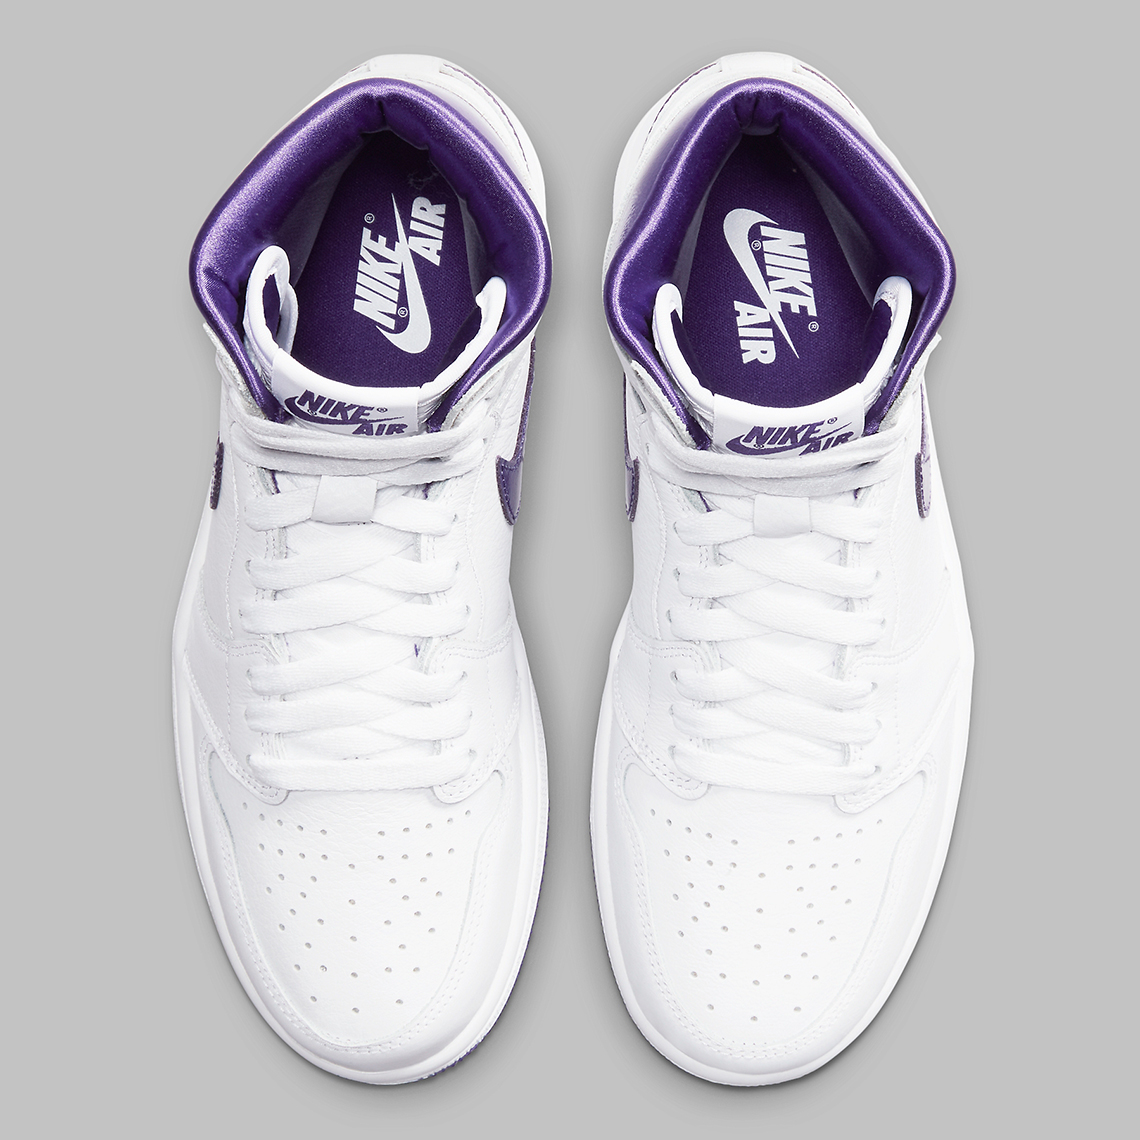 Synthetic leather strap with Jordan branding Retro High Og Wmns White Court Purple Cd0461 151 8